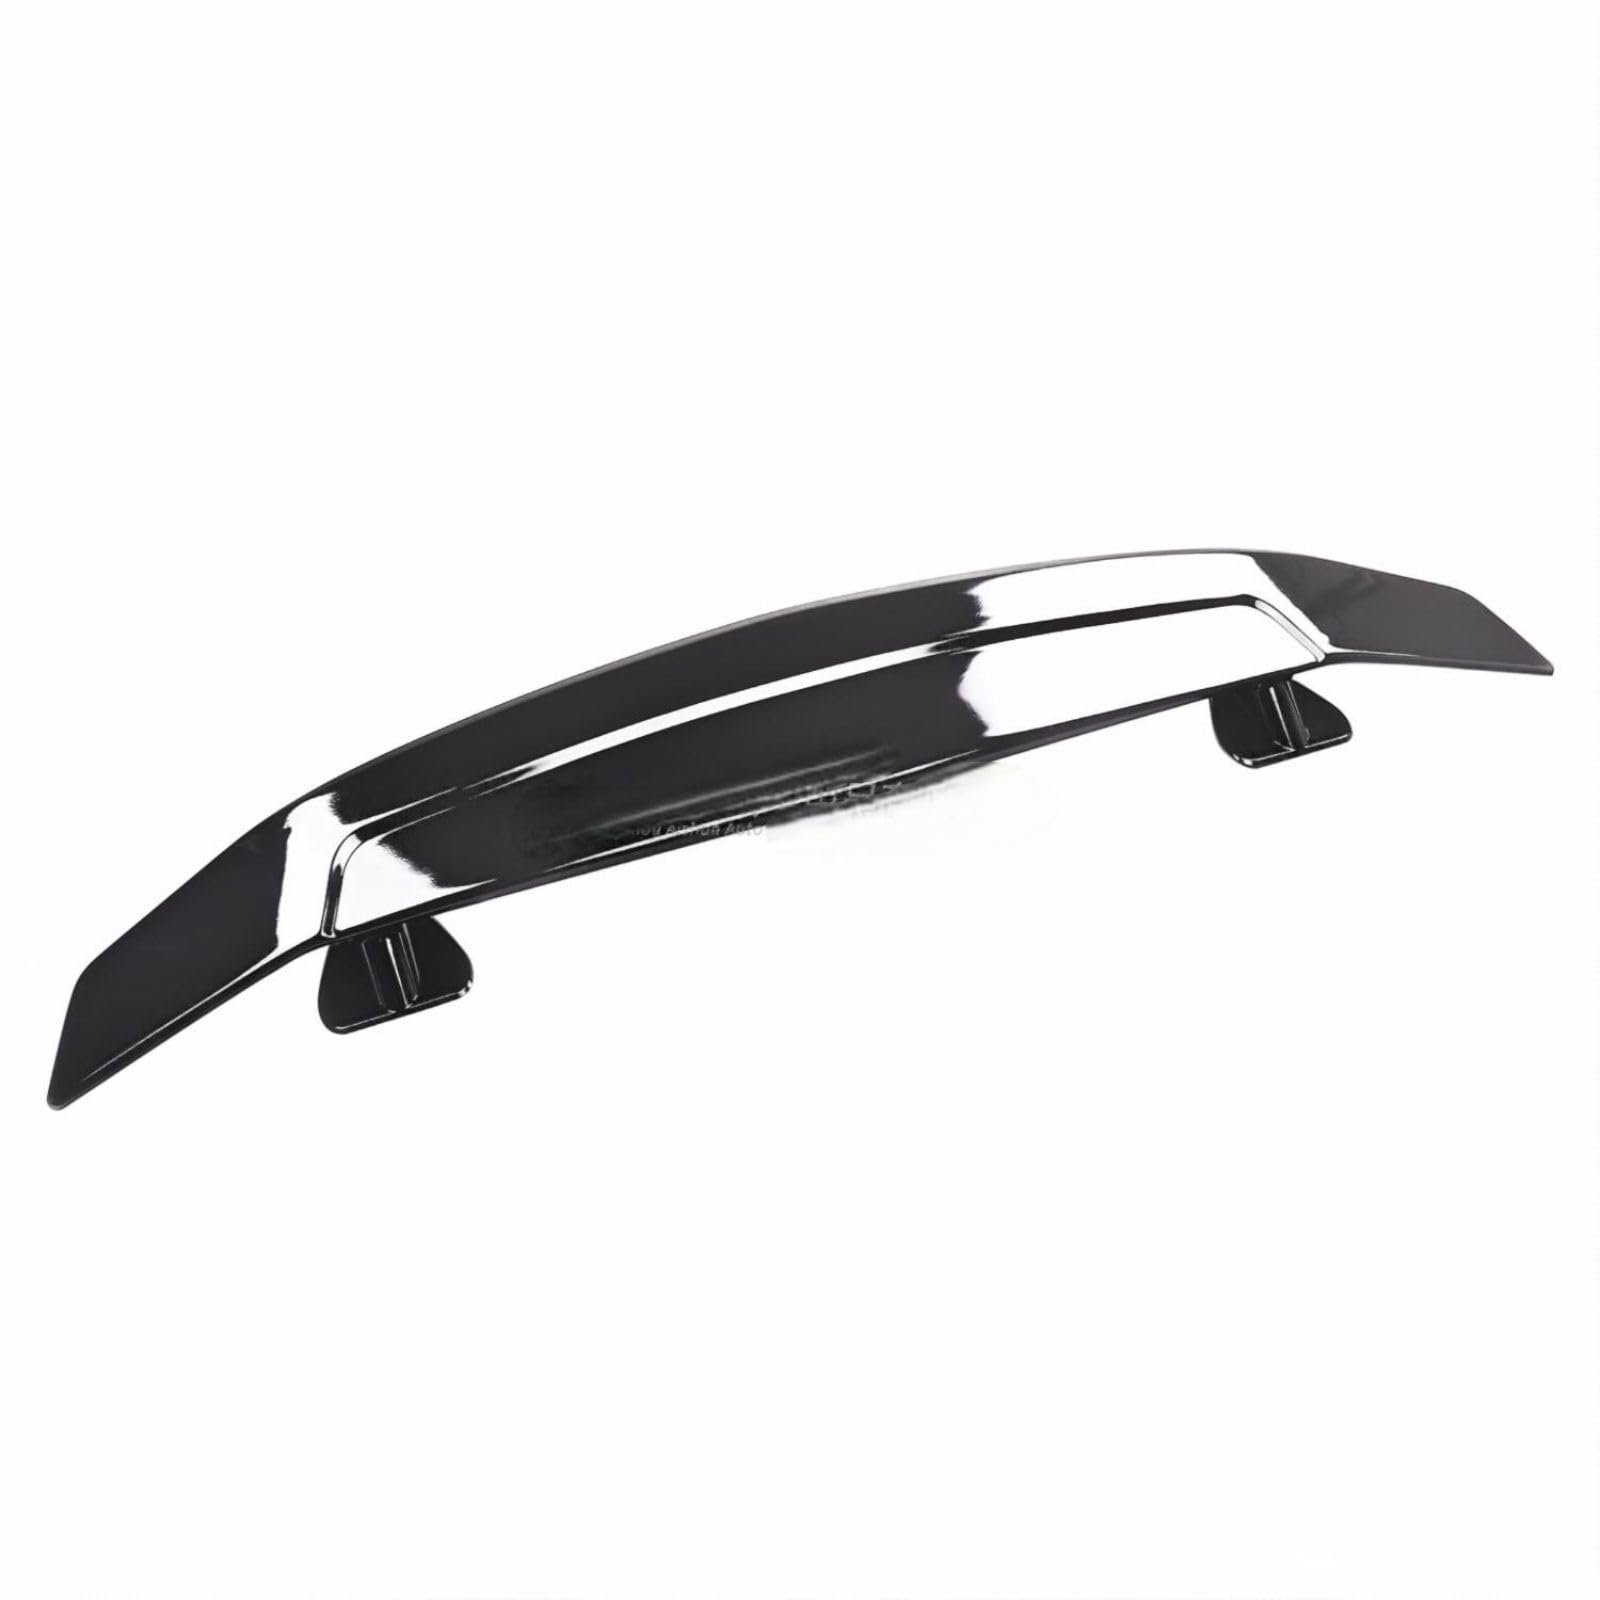 Car Rear Window Spoiler for Cadillac Cts III 2014-2019, without Perforation Lid Spoiler Wings Installation Rear Wing Decoration,Bright Black von EESWCSZZ3